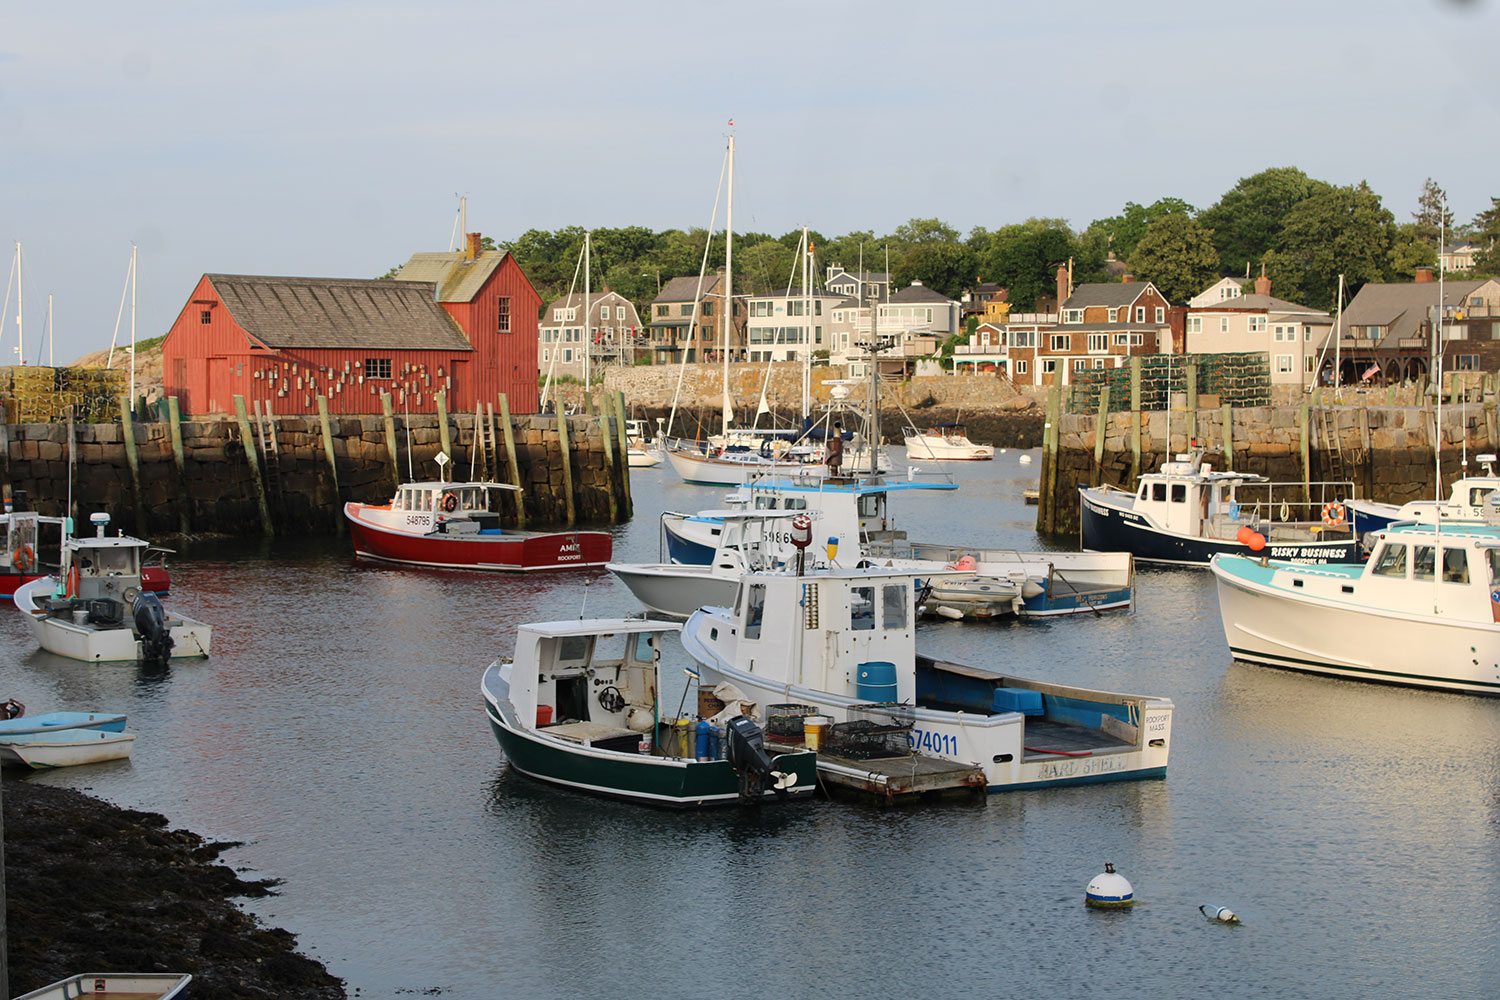 New England Towns - Rockport, MA